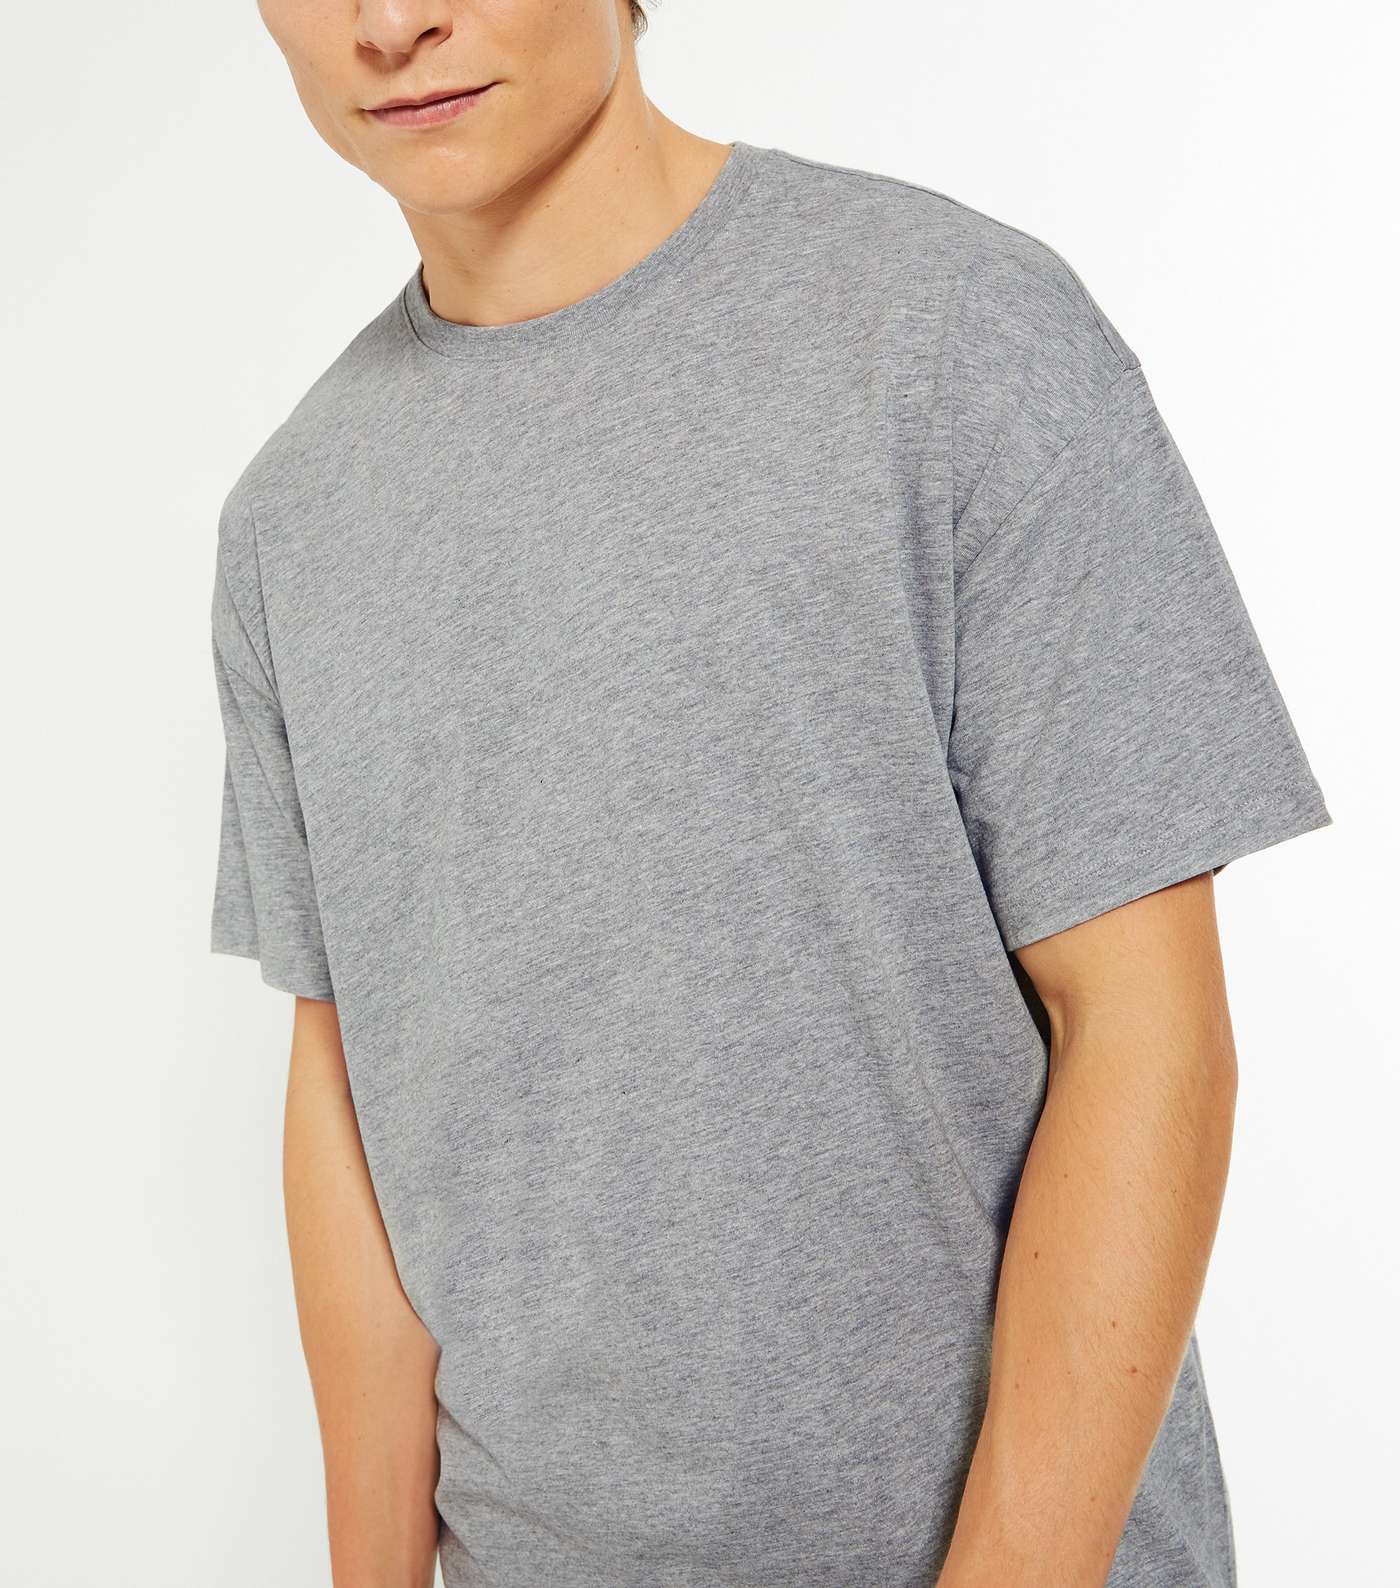 Grey Marl Plain Relaxed Fit T-Shirt Image 3